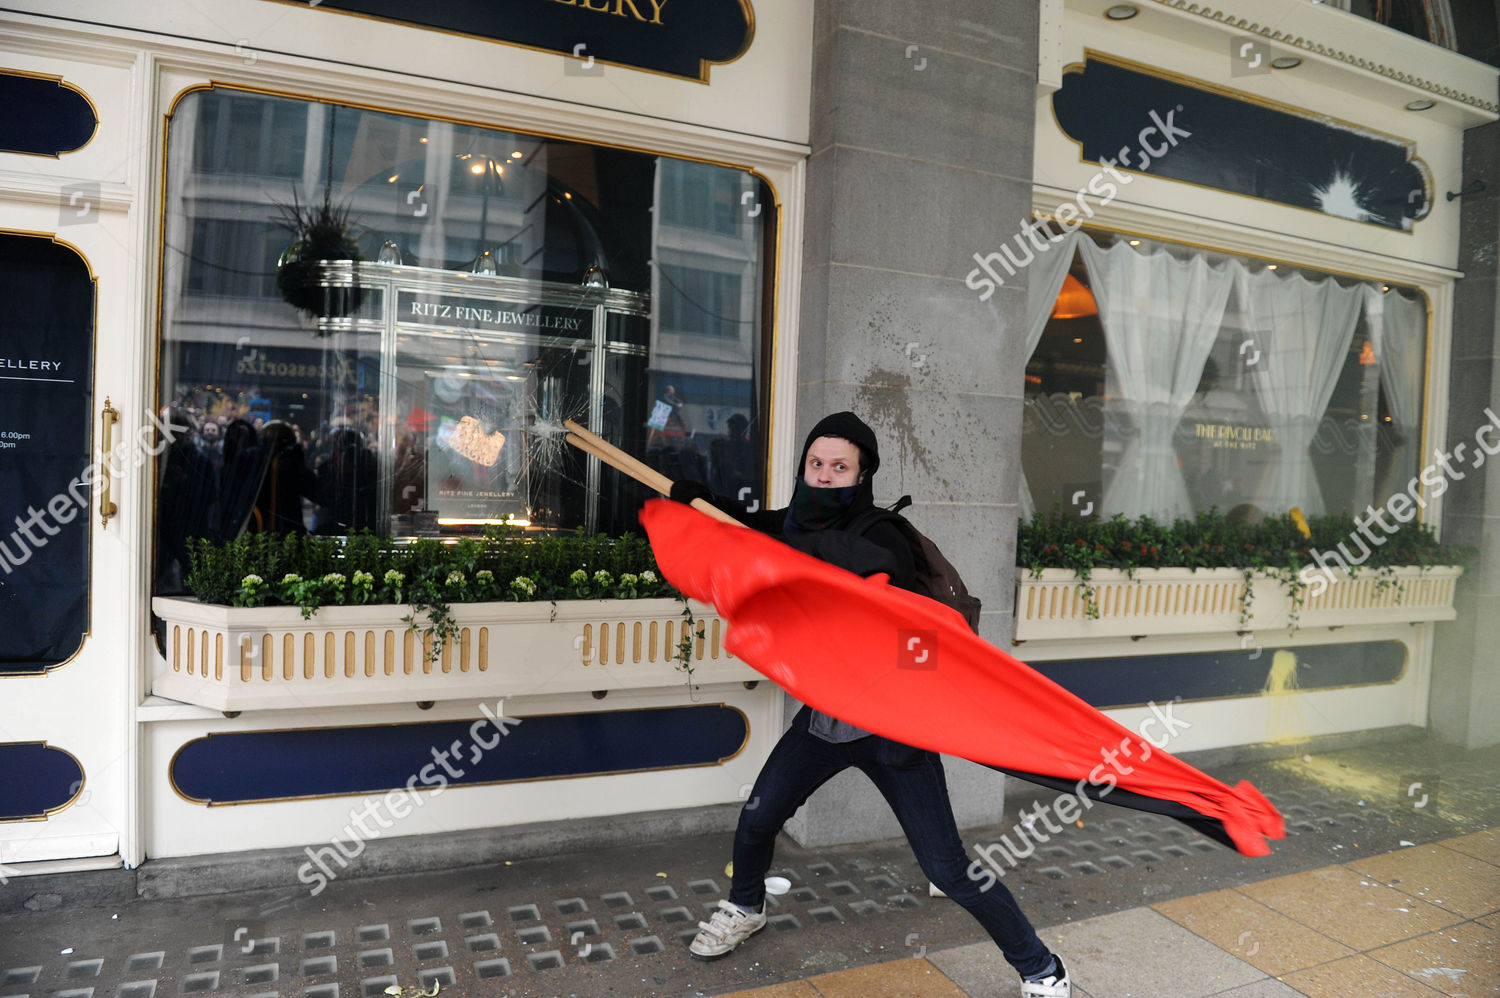 Protesters Smash Windows Ritz Jewellery Shop Piccadilly